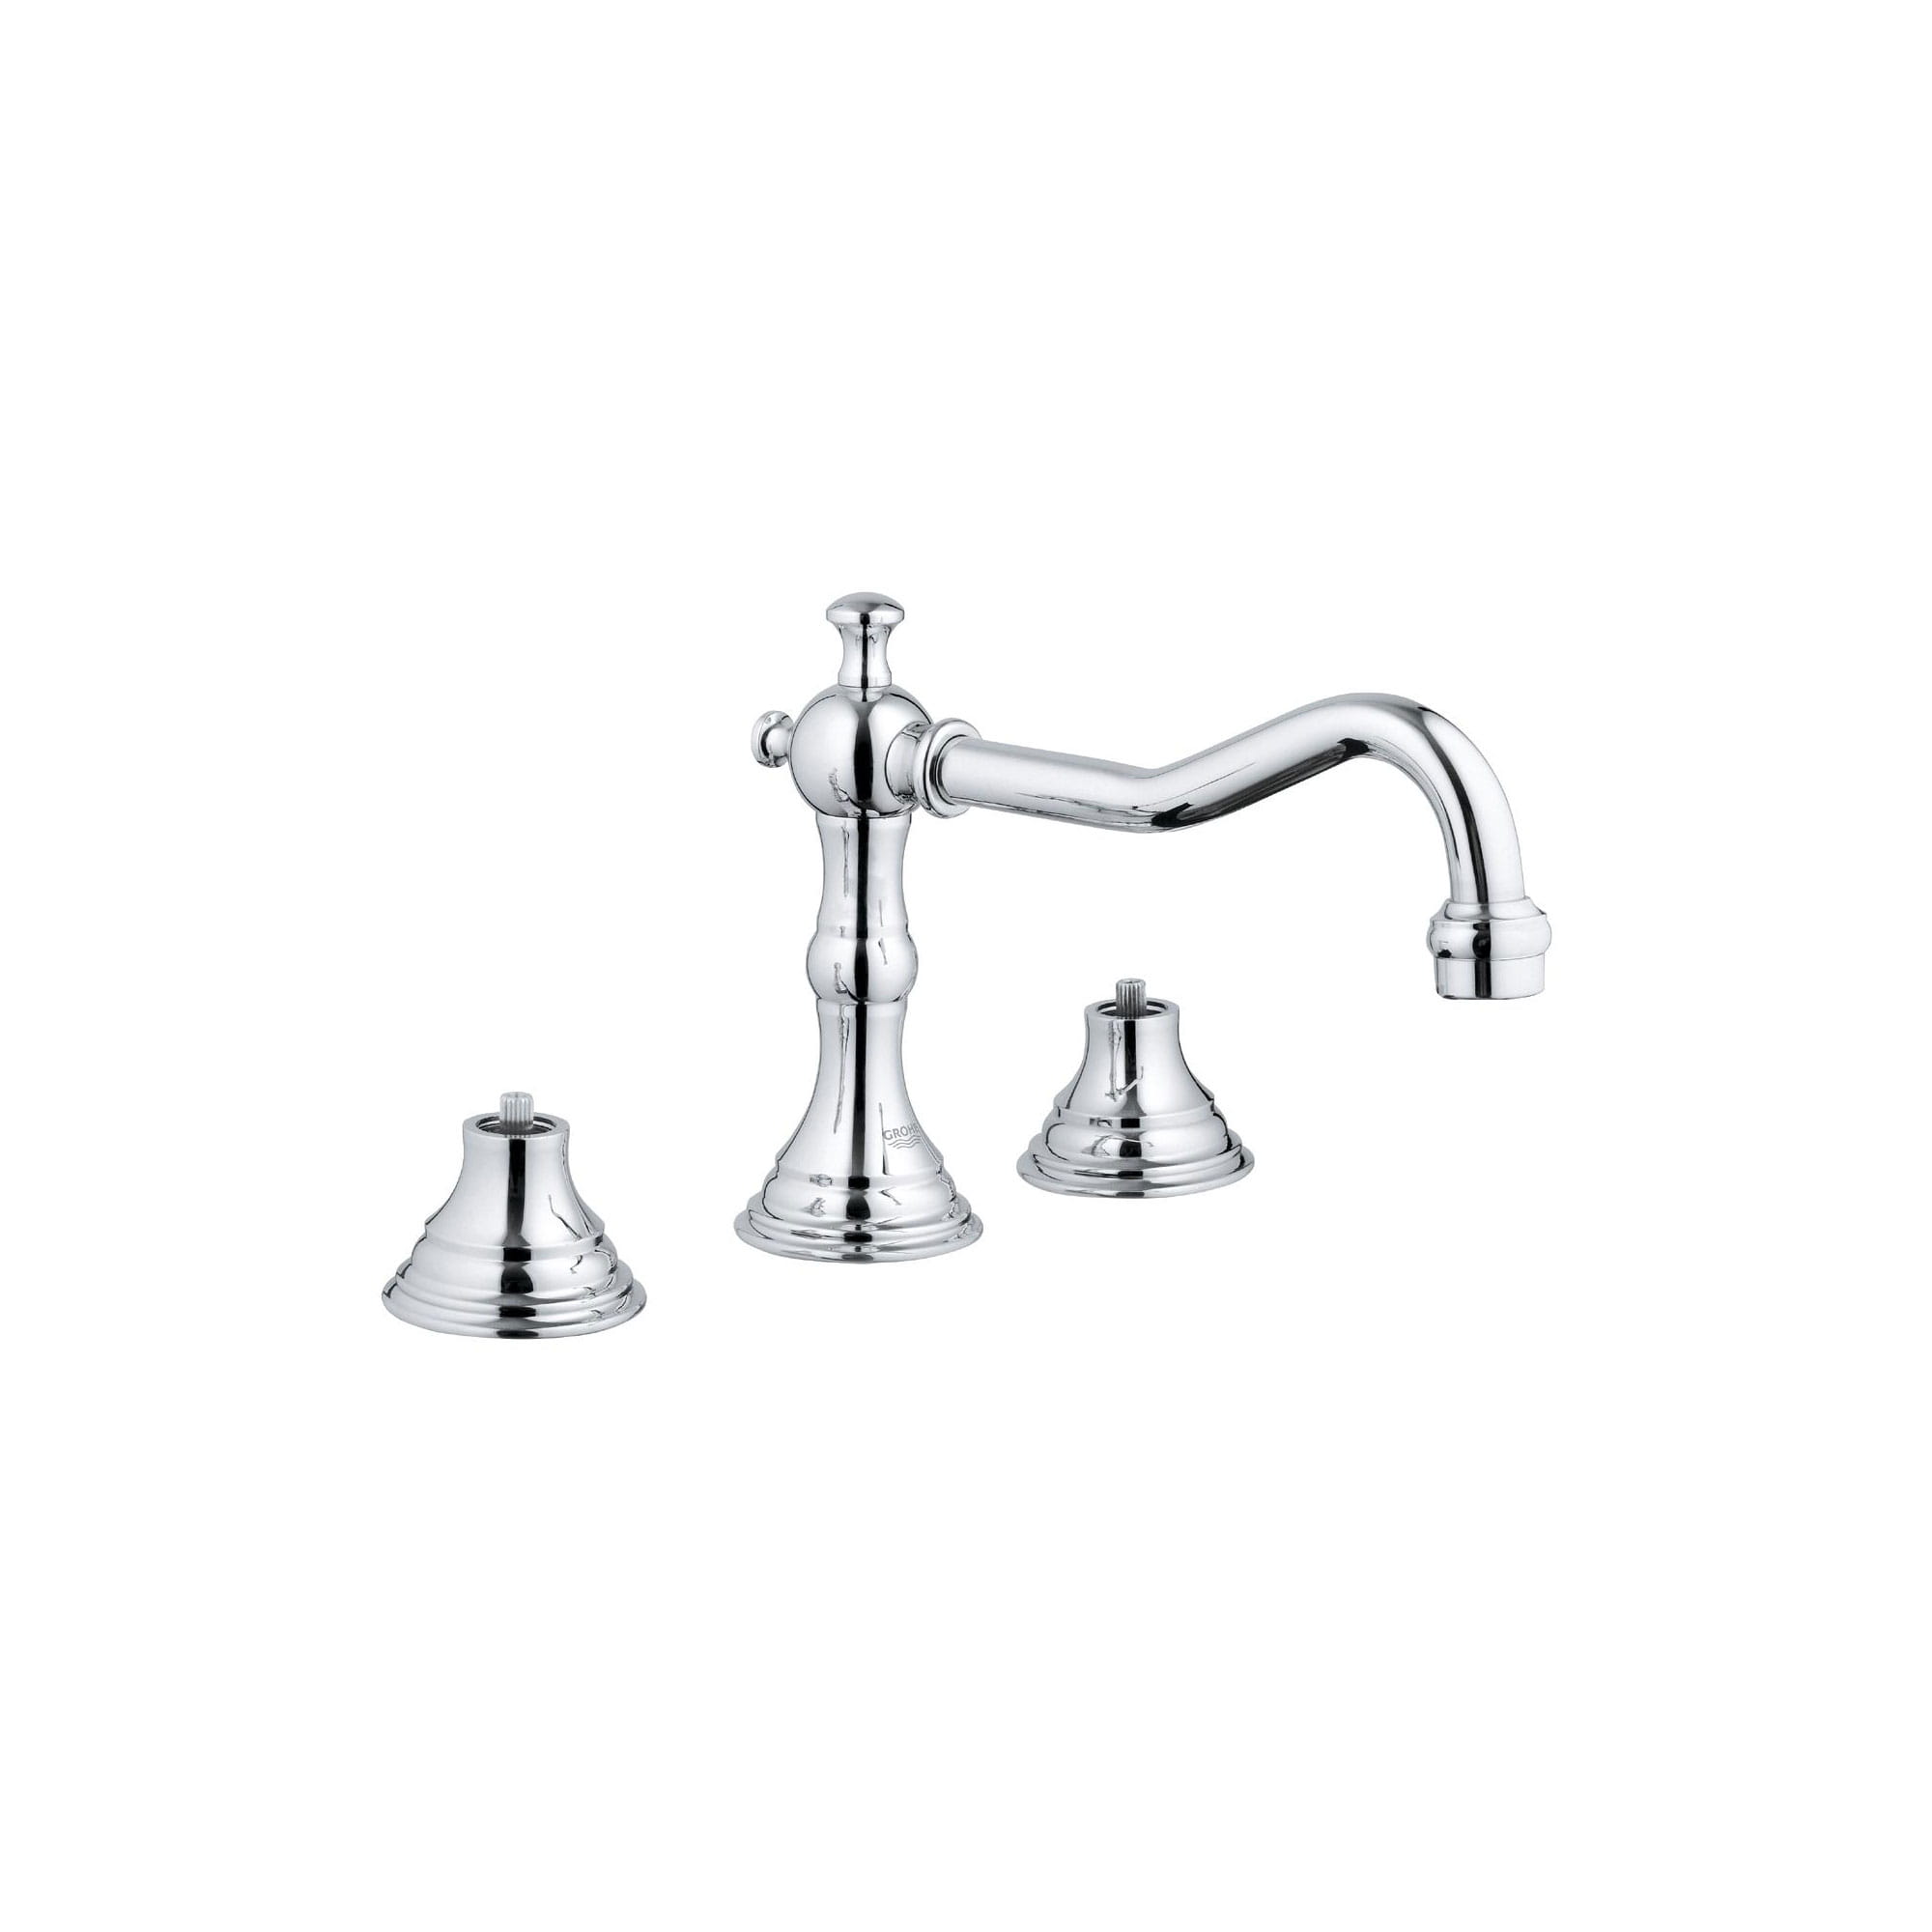 8-inch Widespread 2-Handle S-Size Bathroom Faucet 1.5 GPM